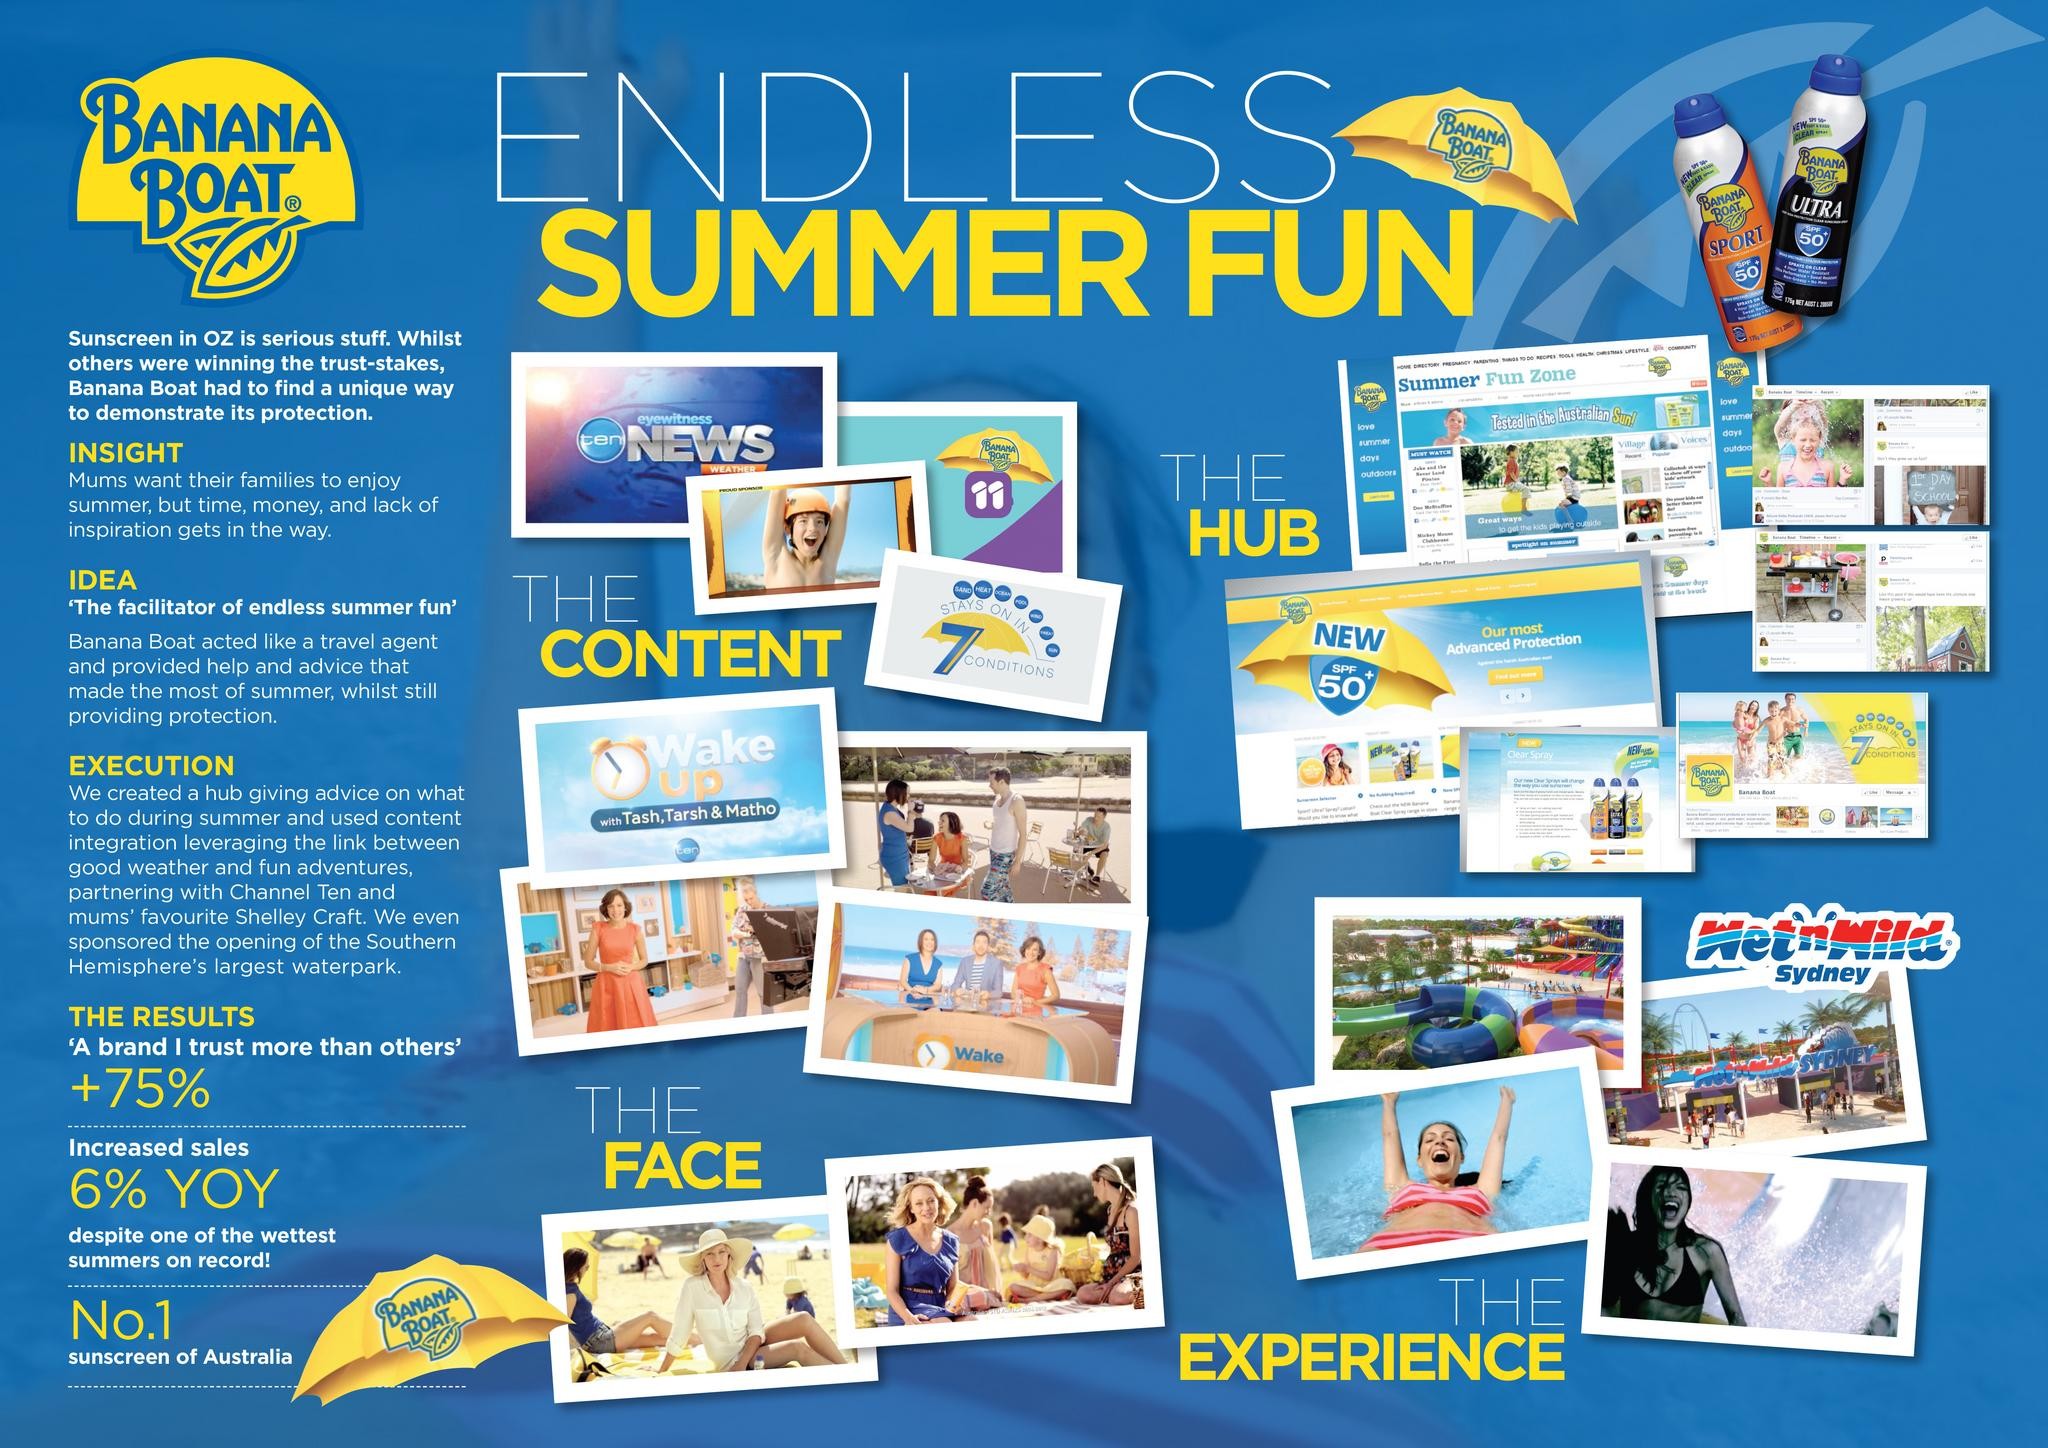 TURNING BANANA BOAT INTO A TRAVEL AGENT FOR SUMMER FUN